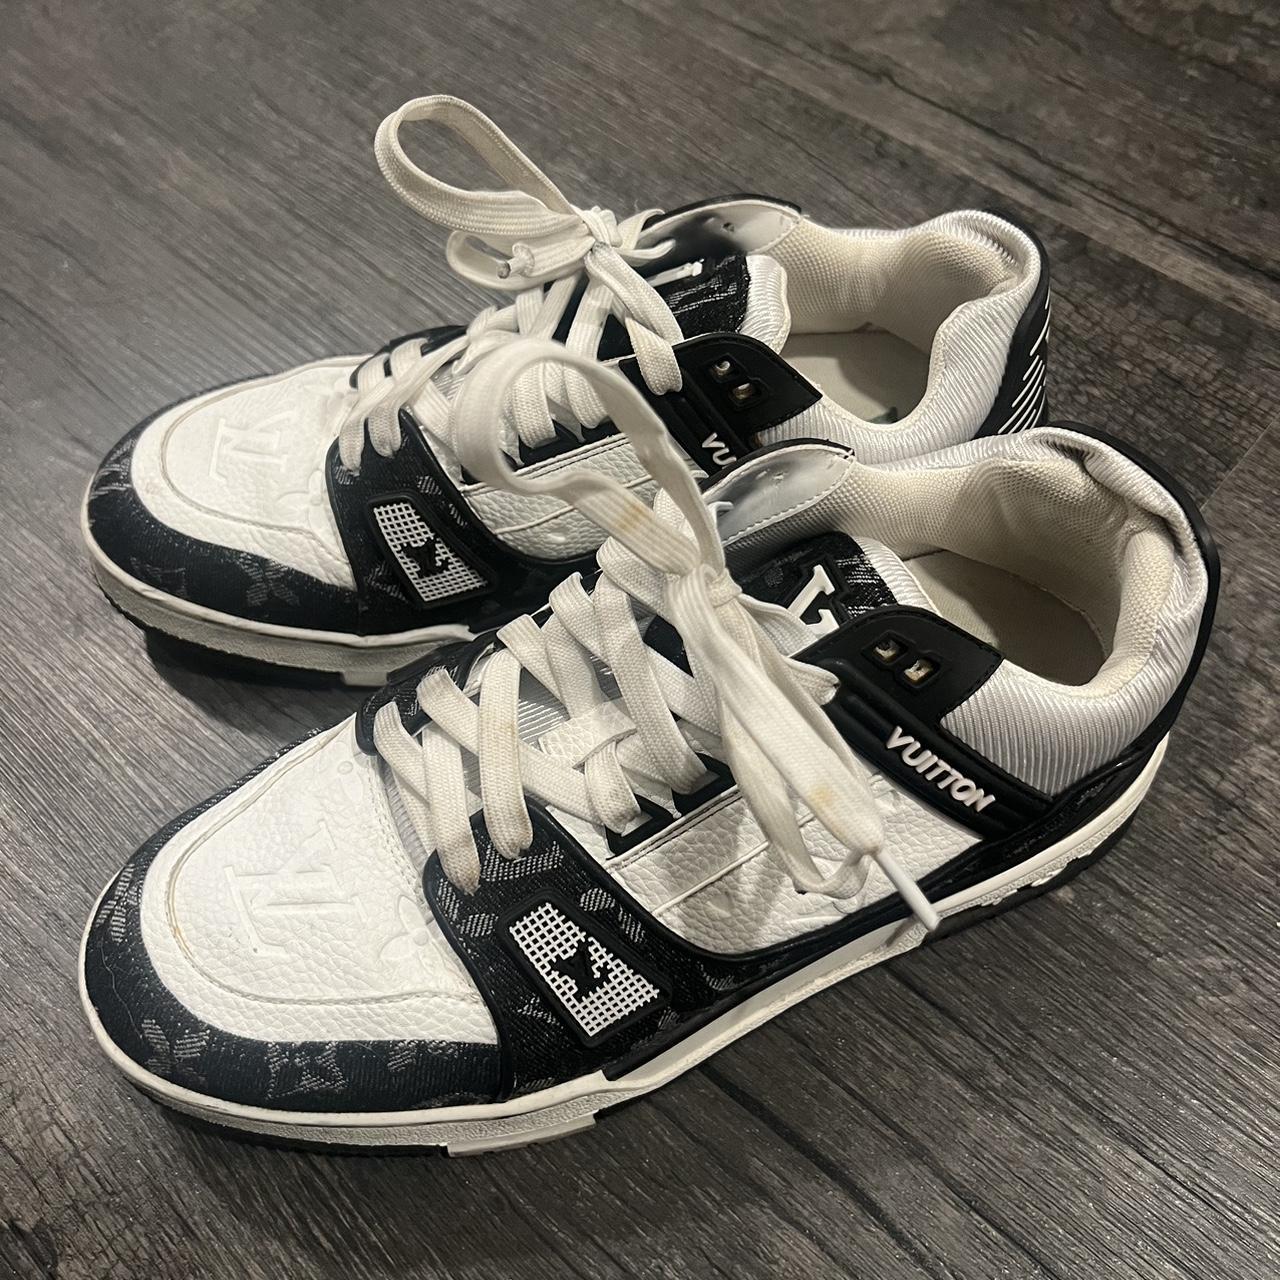 Authentic Louis Vuitton sneakers. New shoelaces and - Depop